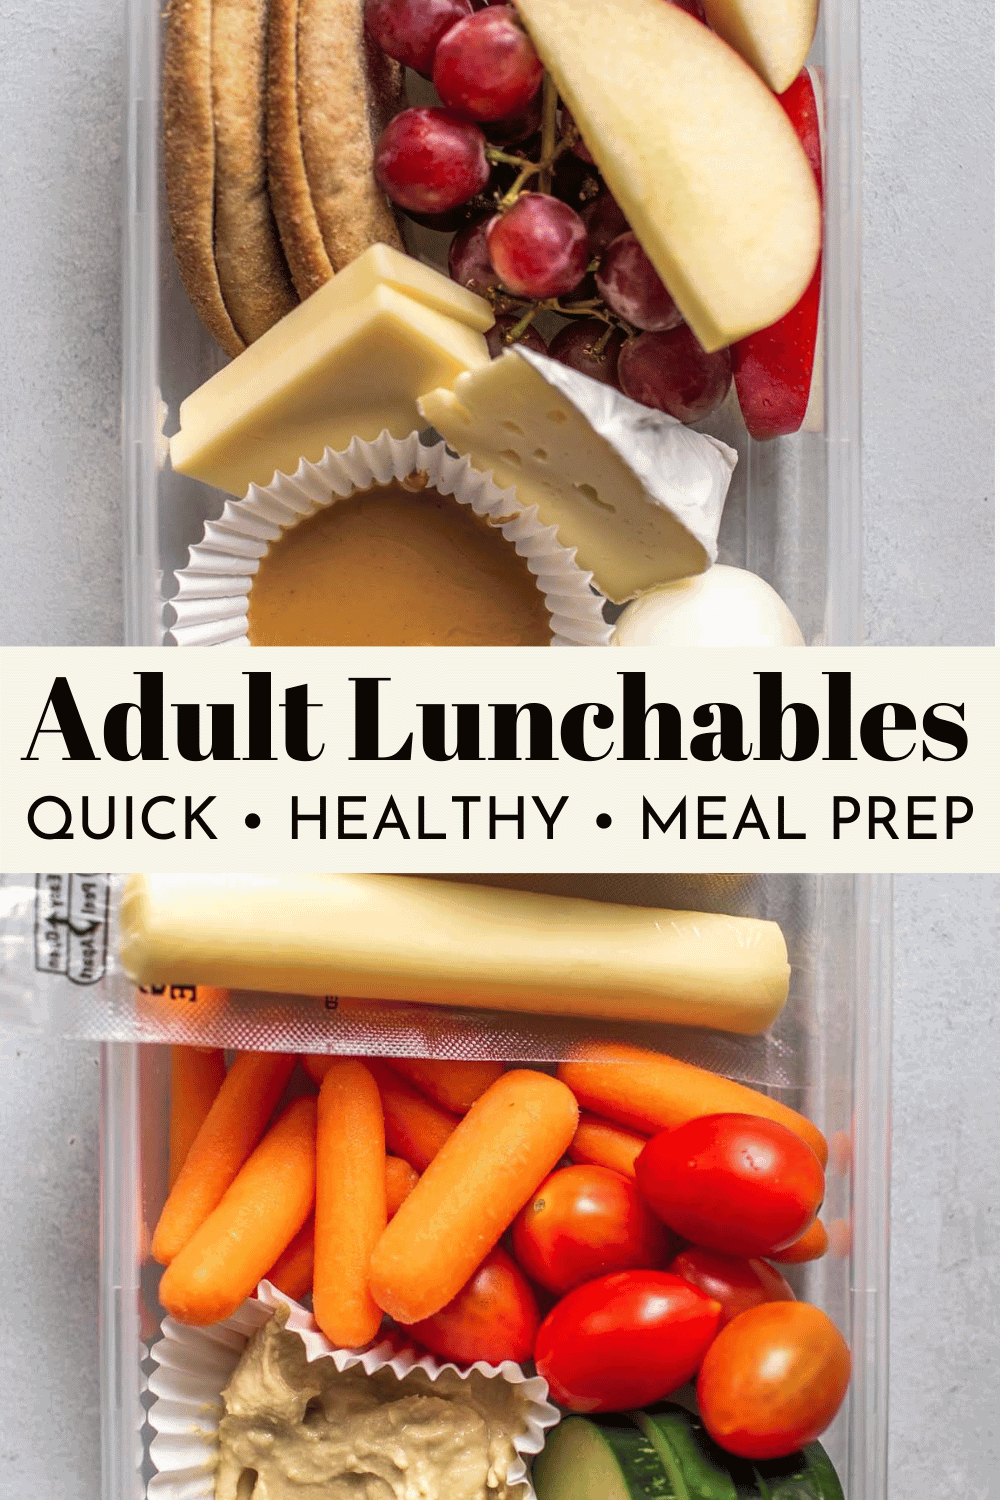 https://www.platingsandpairings.com/wp-content/uploads/2018/09/ADULT-LUNCHABLES-PIN.png